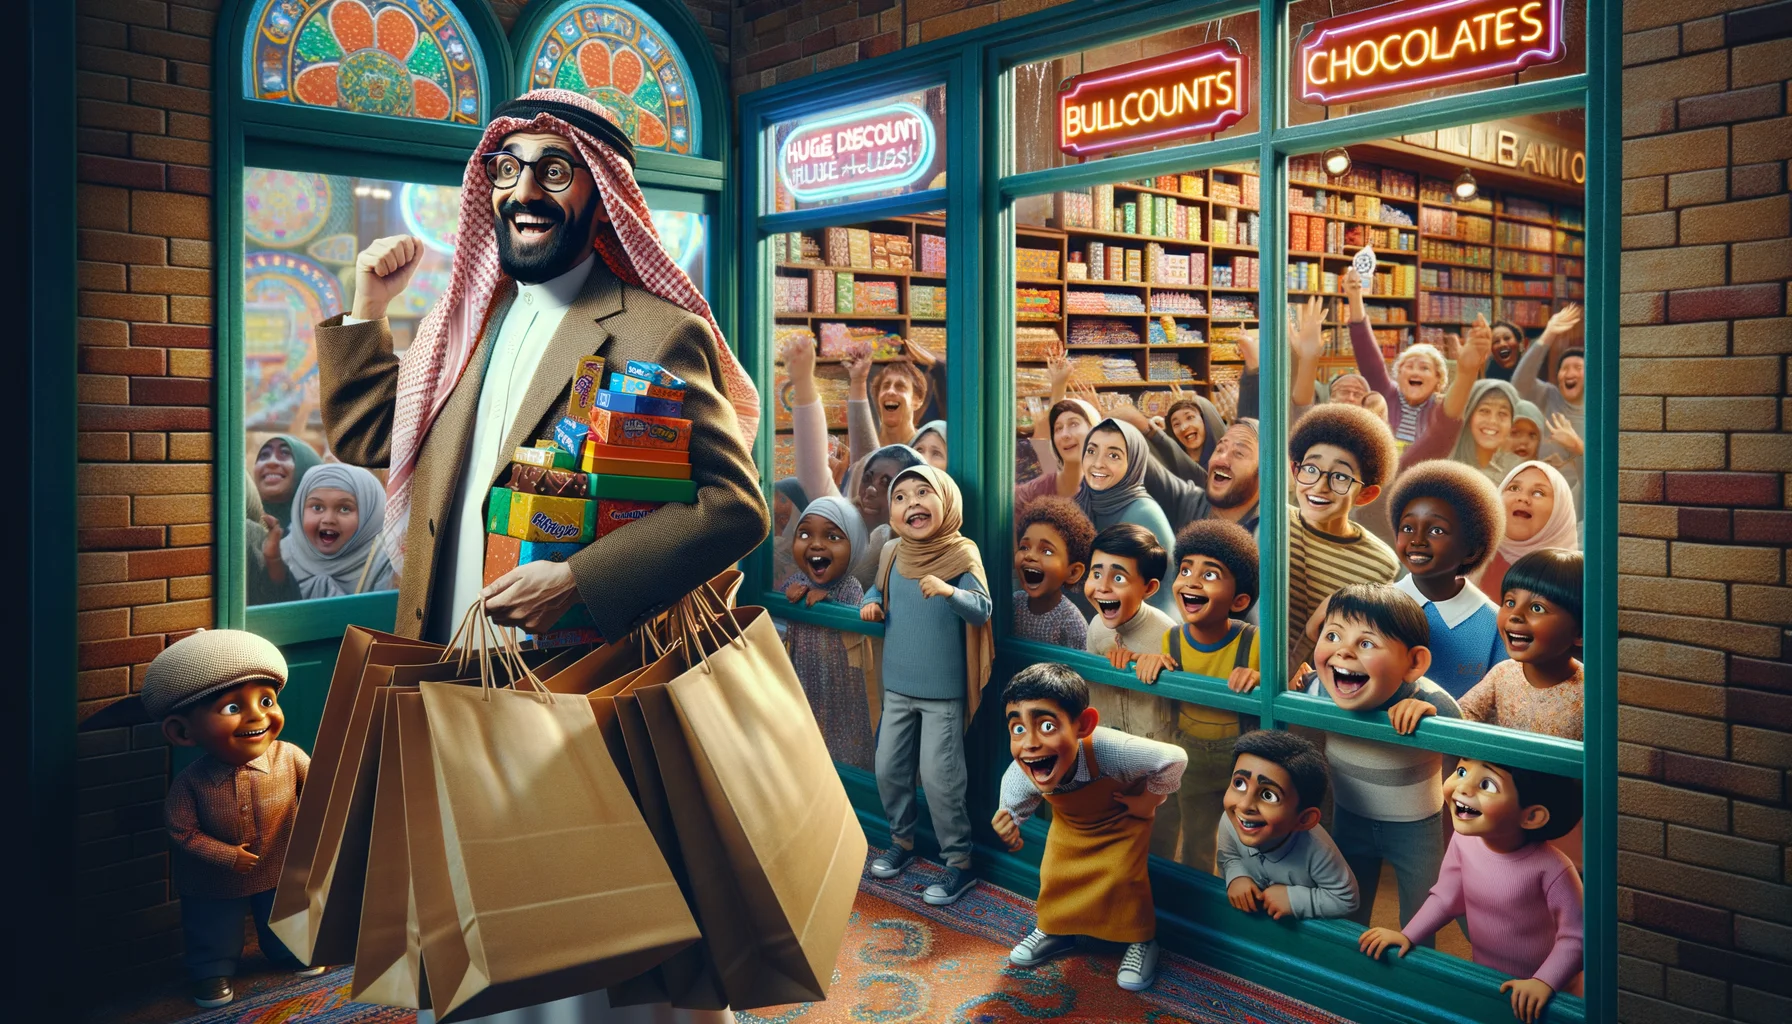 Generate an image showcasing a humorous and realistic scene in a traditional candy store. The scene is filled with various customers of different descents and genders, all lined up holding oversized shopping bags, eagerly waiting for their turn. A Middle-Eastern male storekeeper with an amused and wide smile on his face as he tries to keep up with the demand. The windows of the store have bright neon signs like 